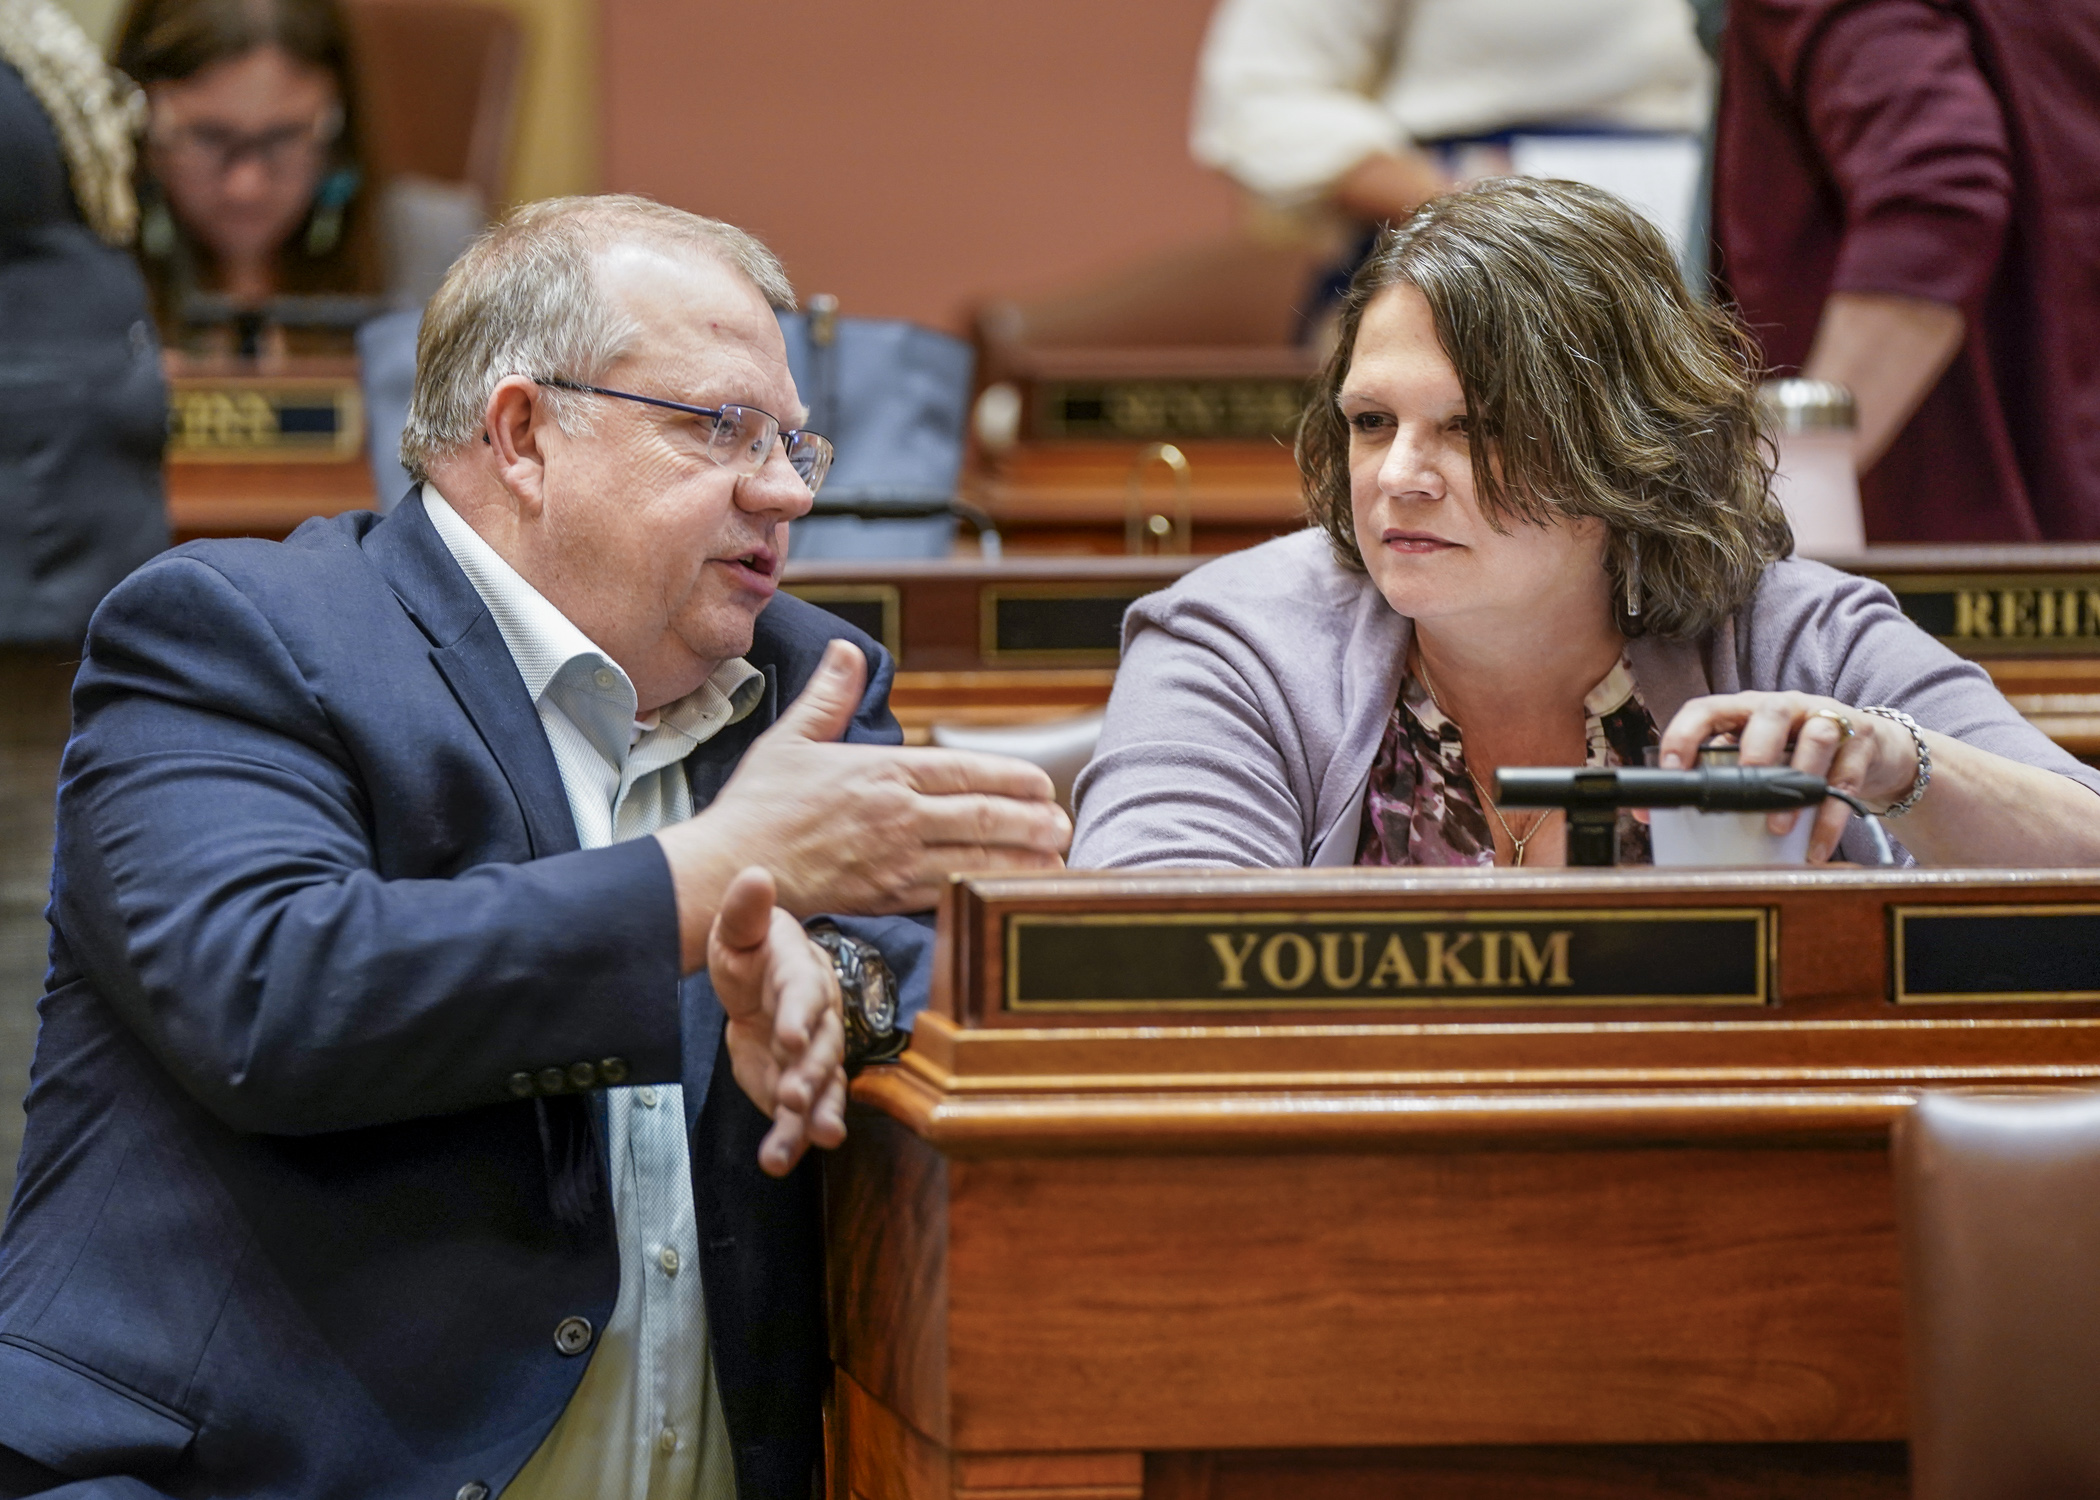 Rep. Ron Kresha and Rep. Cheryl Youakim converse during a floor session April 12. (Photo by Catherine Davis)